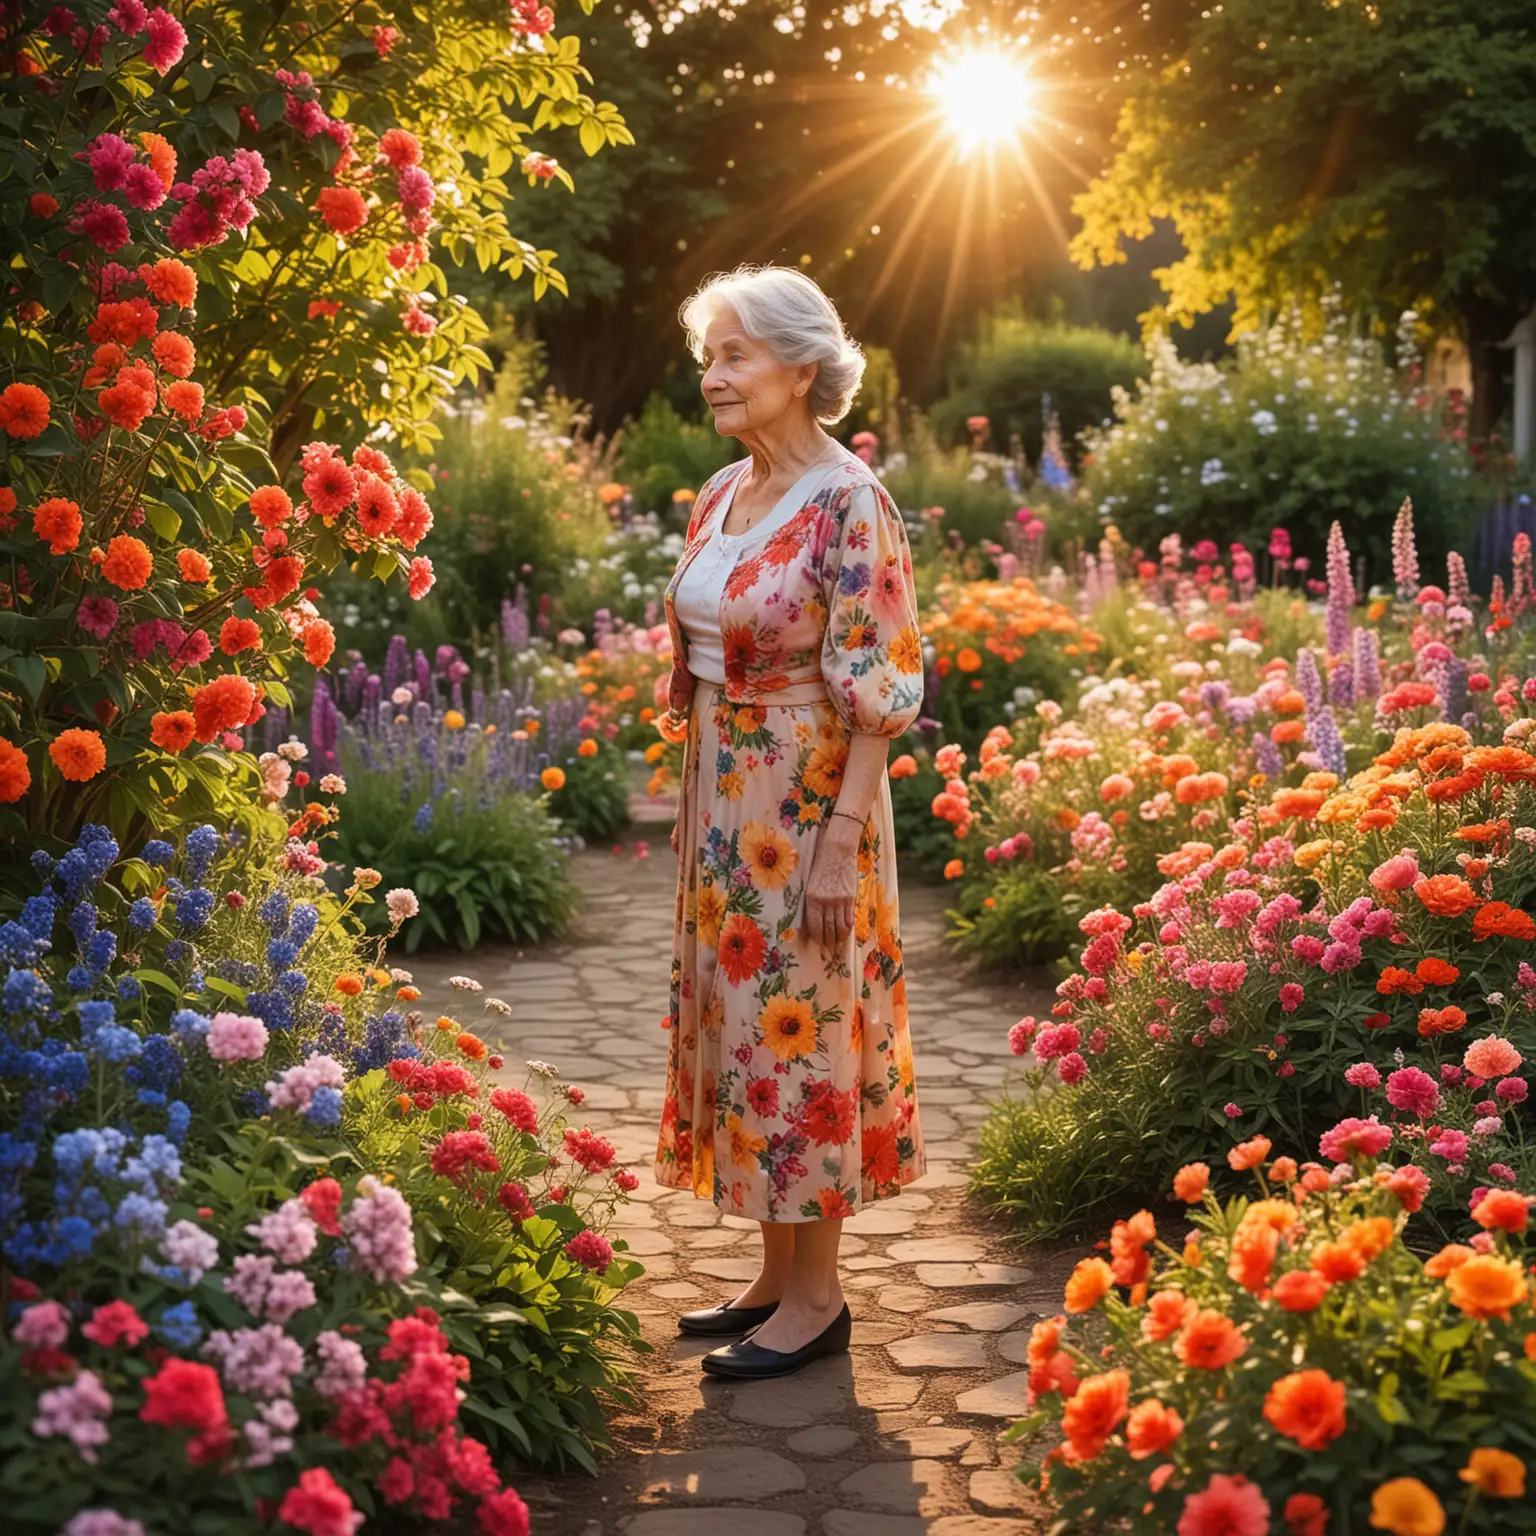 Imagine an elegant elderly woman standing in a garden surrounded by a riot of colorful blooms, with the sun setting in the distance